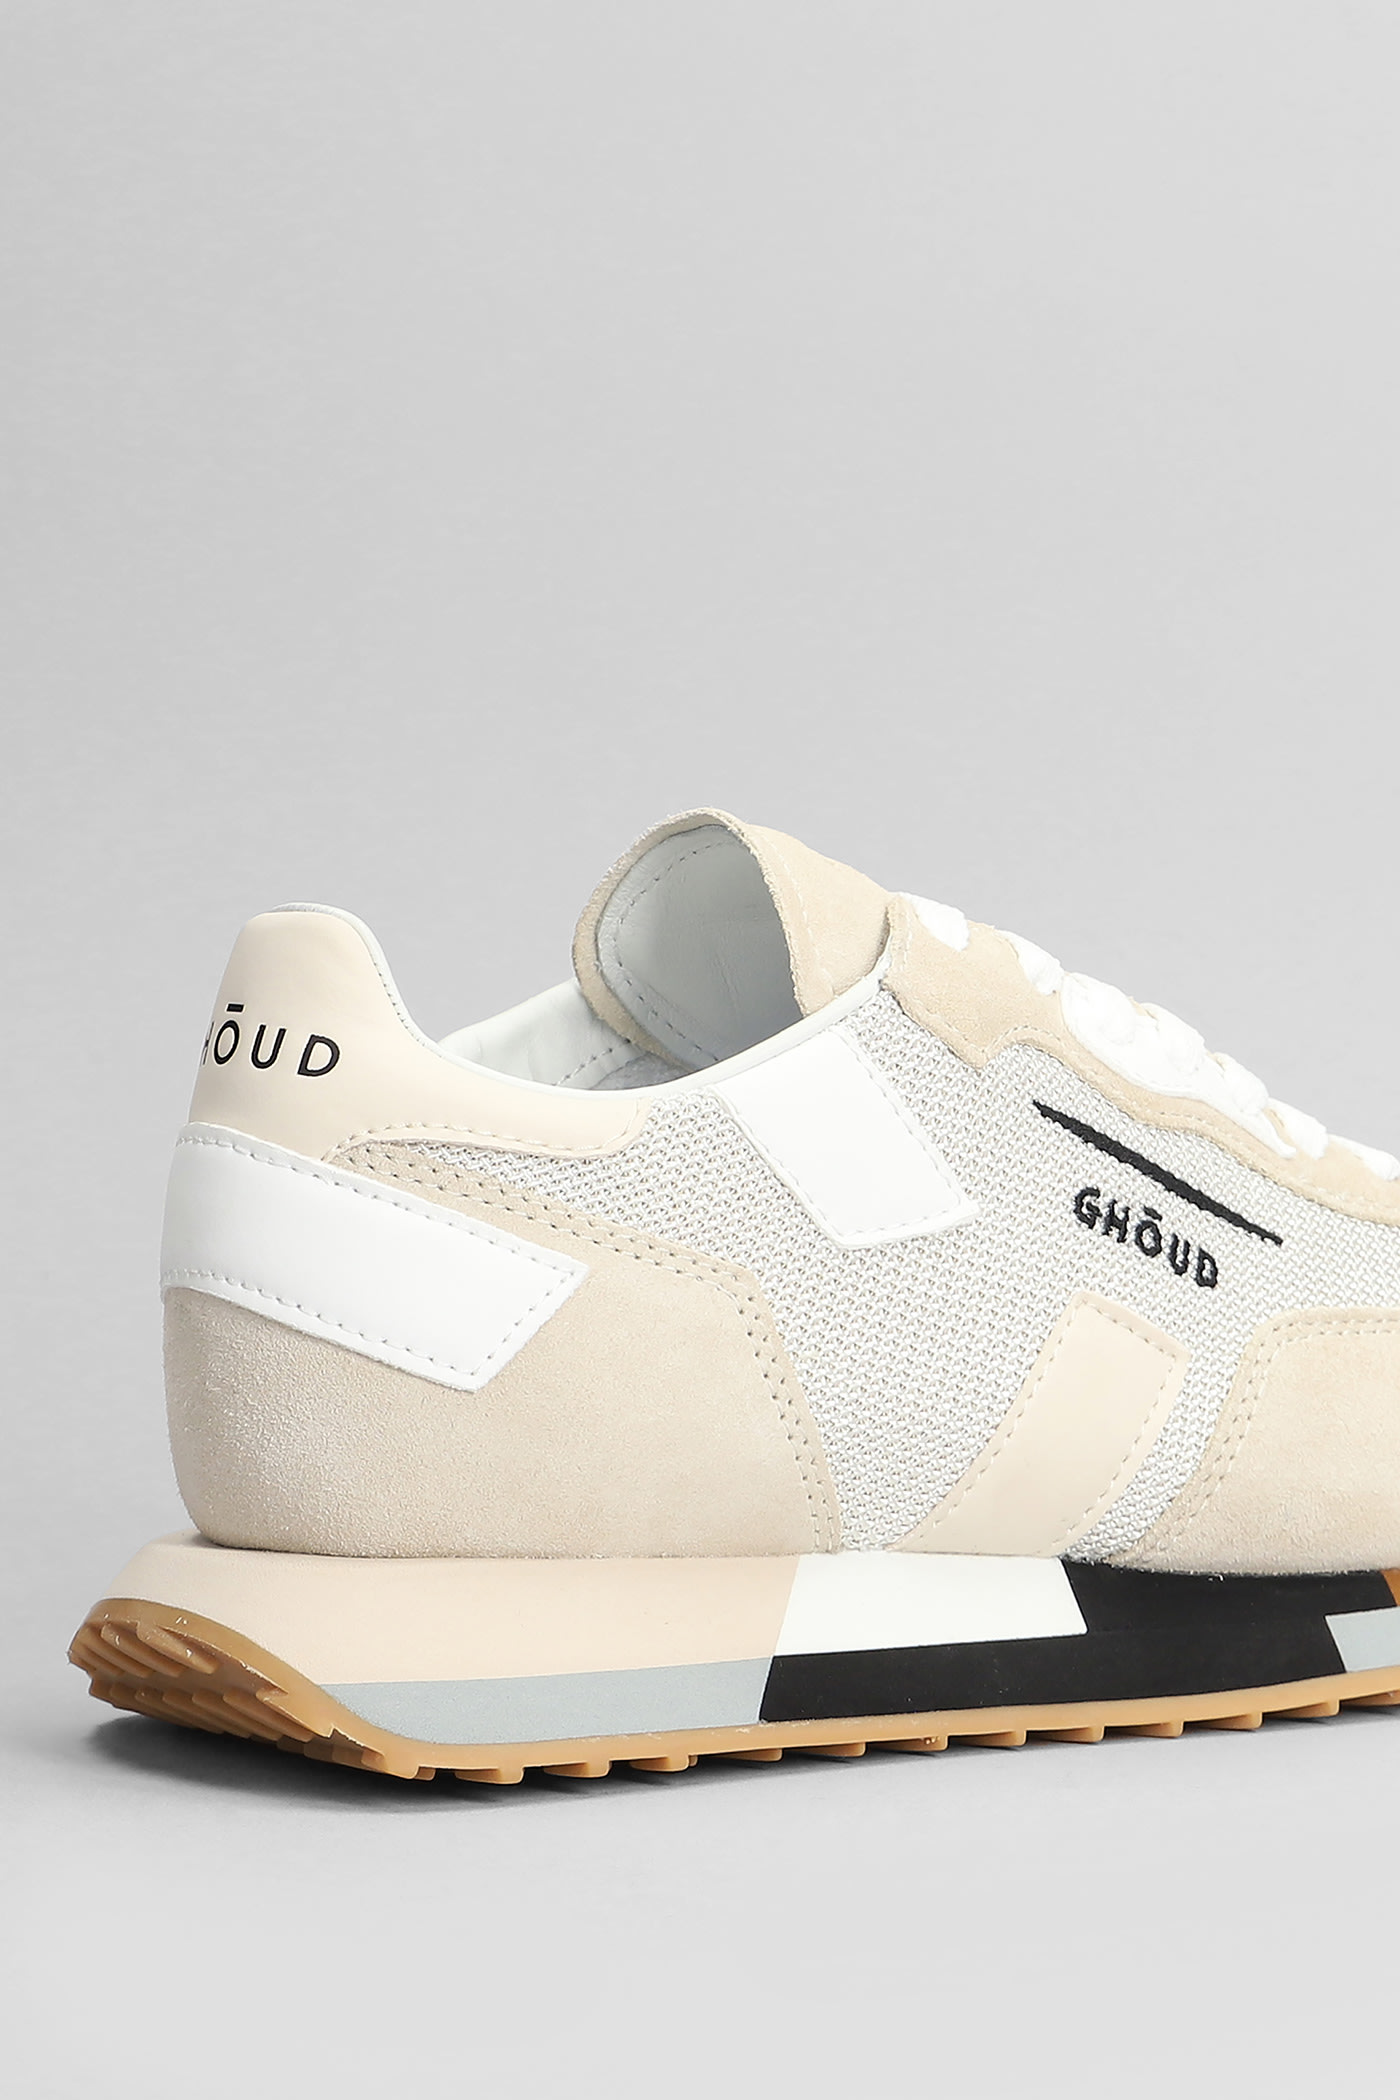 Shop Ghoud Rush Multi Sneakers In Beige Suede And Fabric